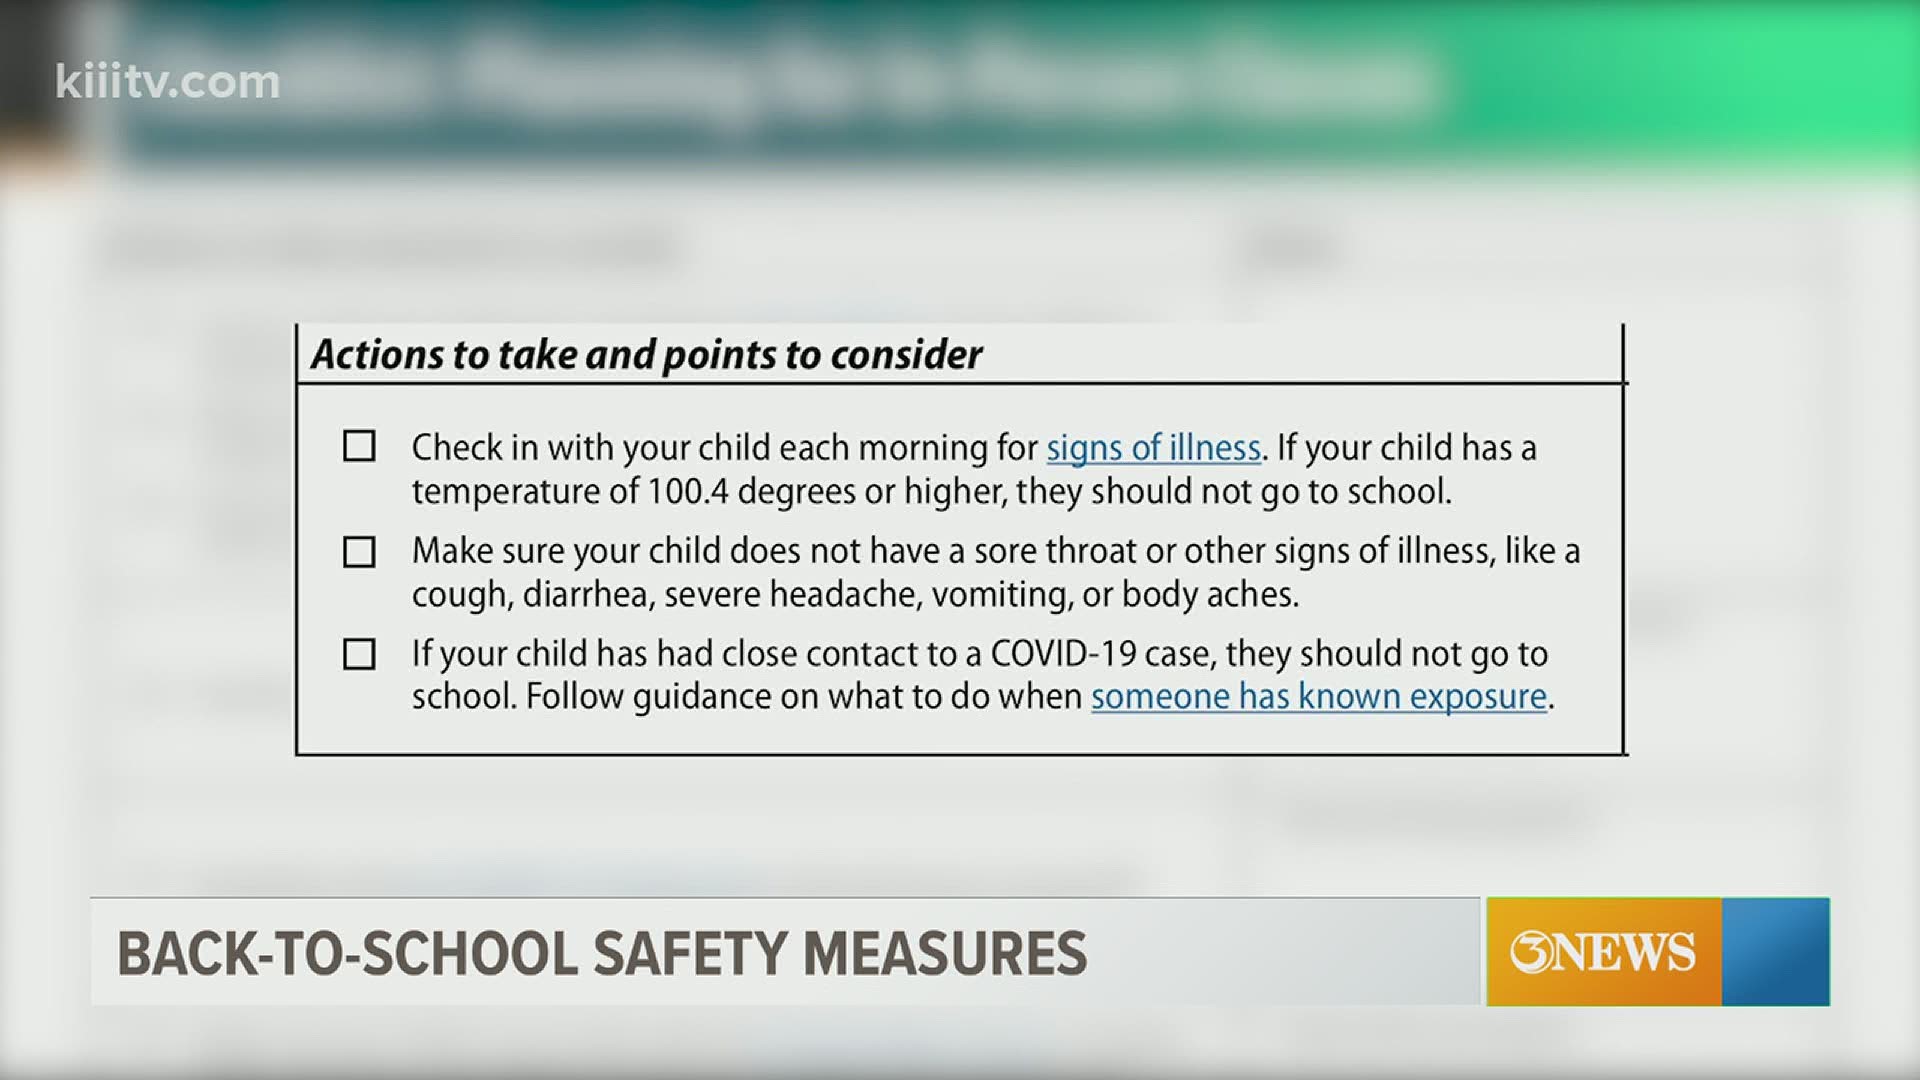 The CDC shares guidance for parents through a check list to ensure your child's safety as they return to the classroom.